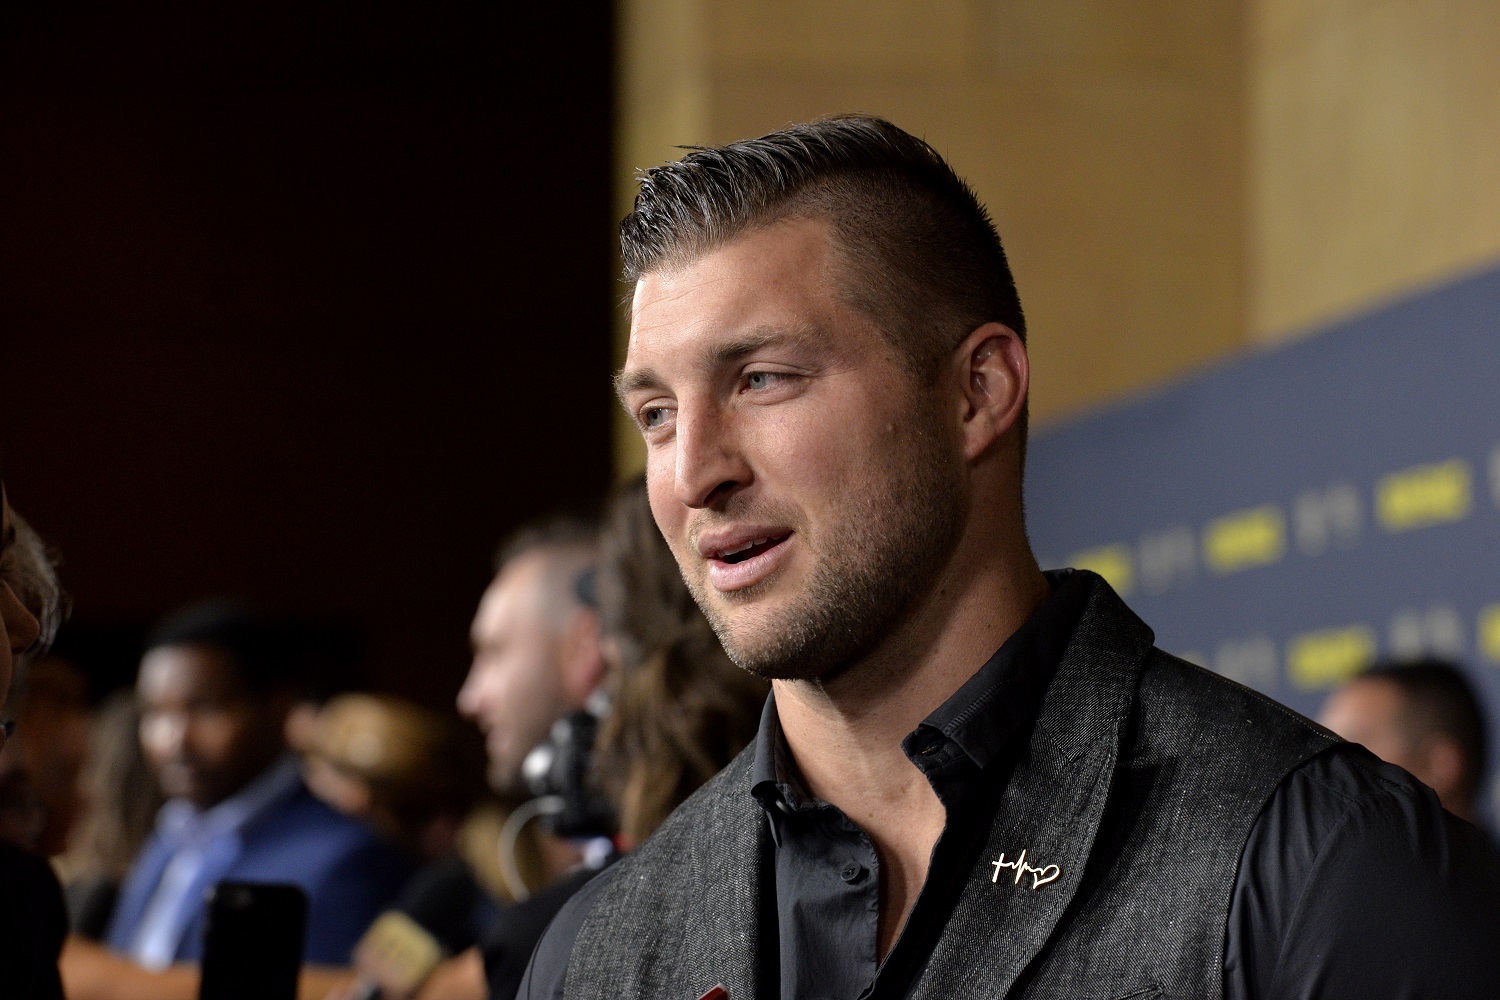 Jacksonville Jaguars tight end Tim Tebow attends the premiere of Roadside Attractions' 'Run The Race' on Feb. 11, 2019, in Hollywood.